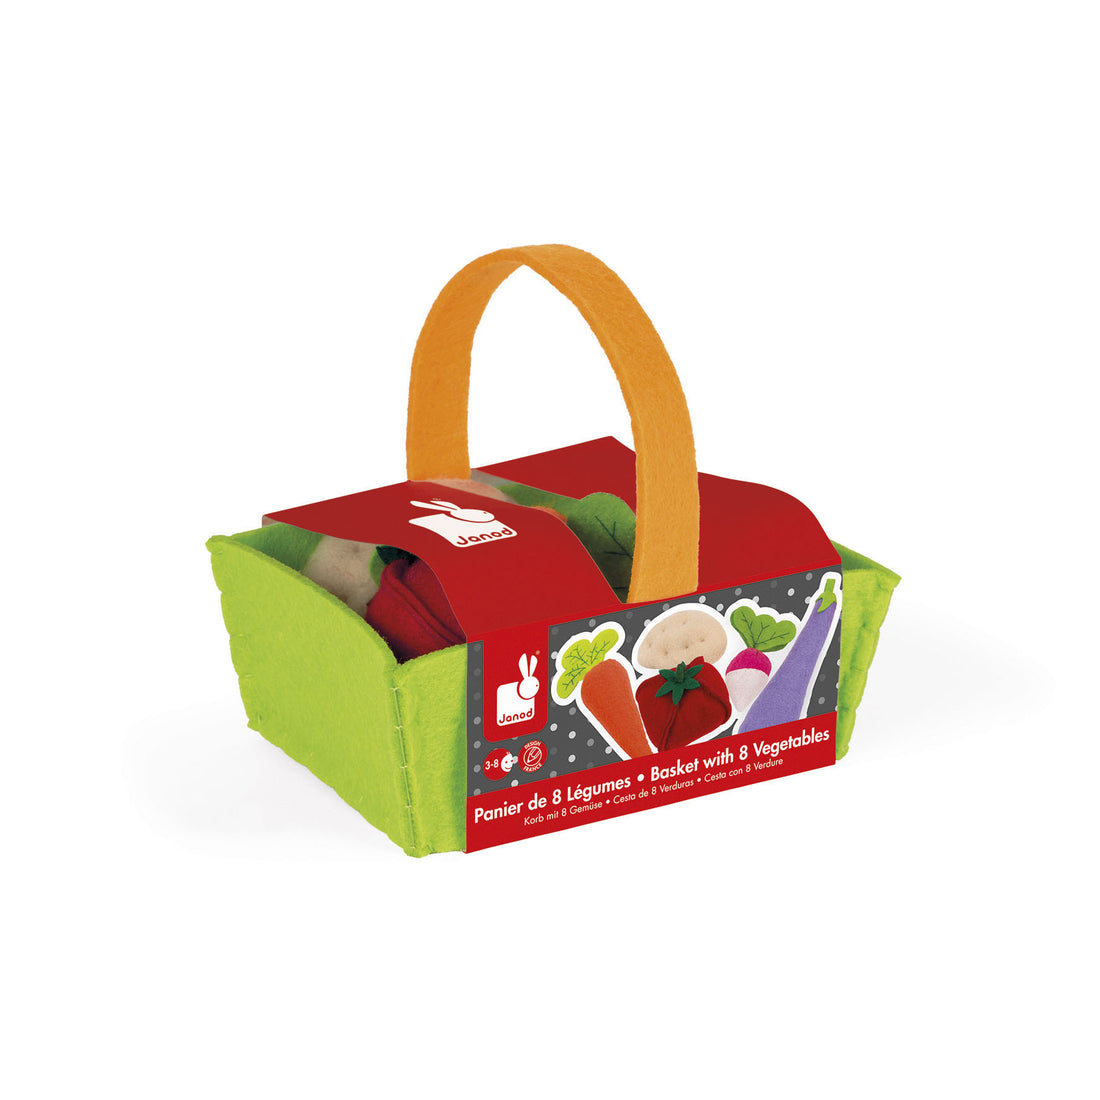 janod-fabric-basket-with-8-vegetables- (2)